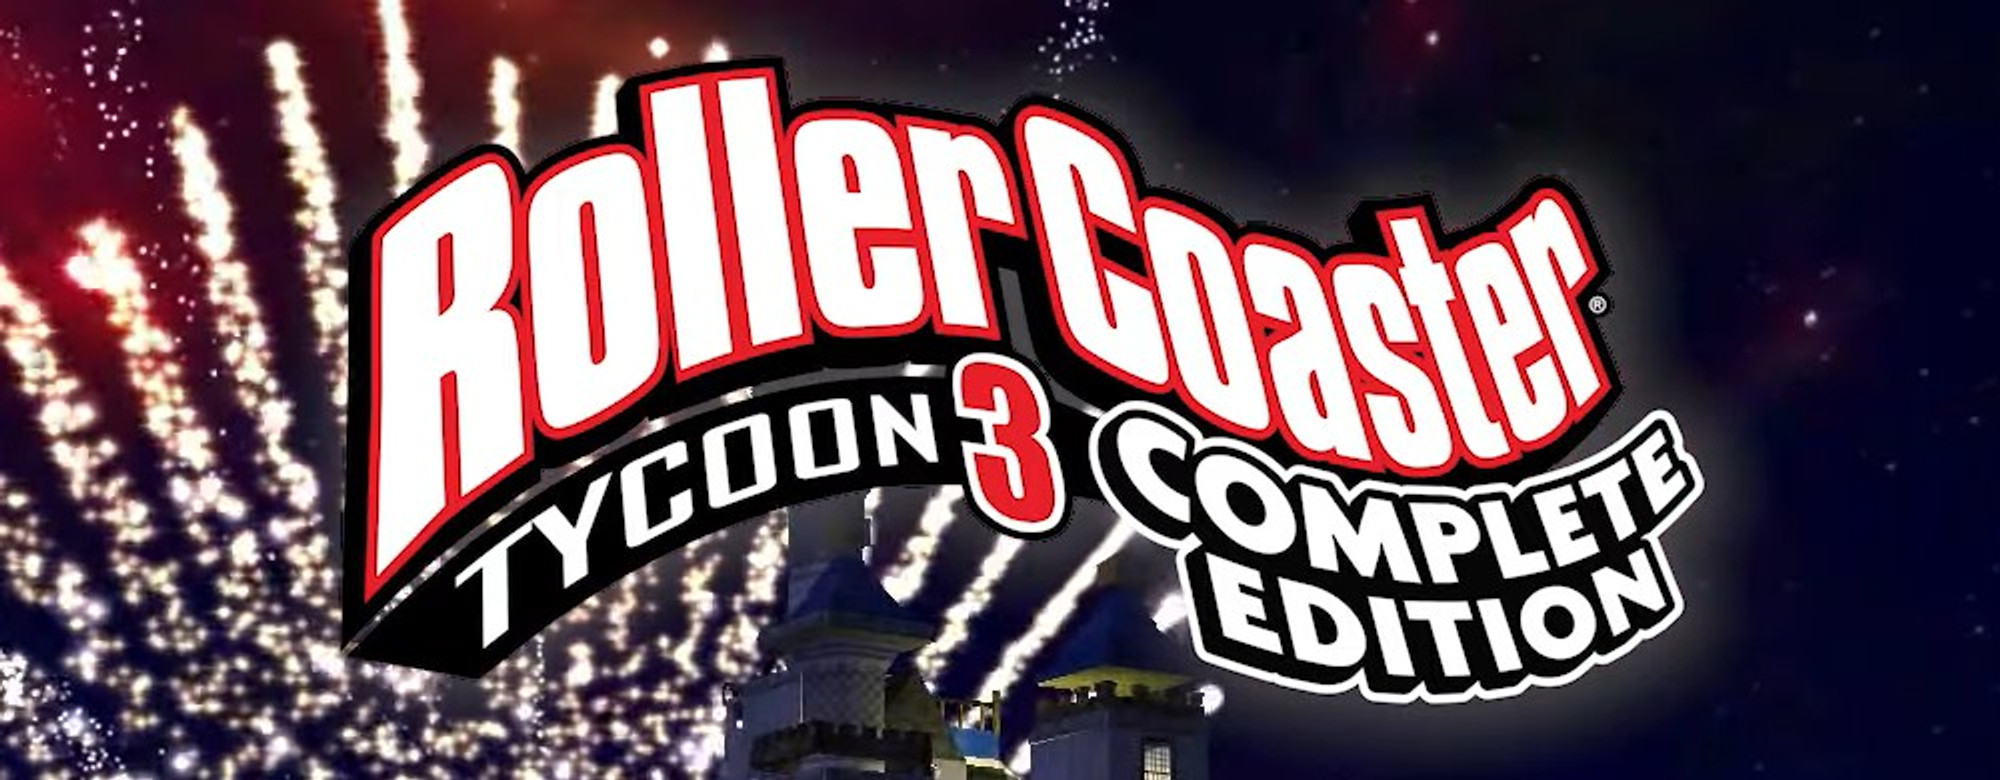 roller-coaster-tycoon-3-complete-edition